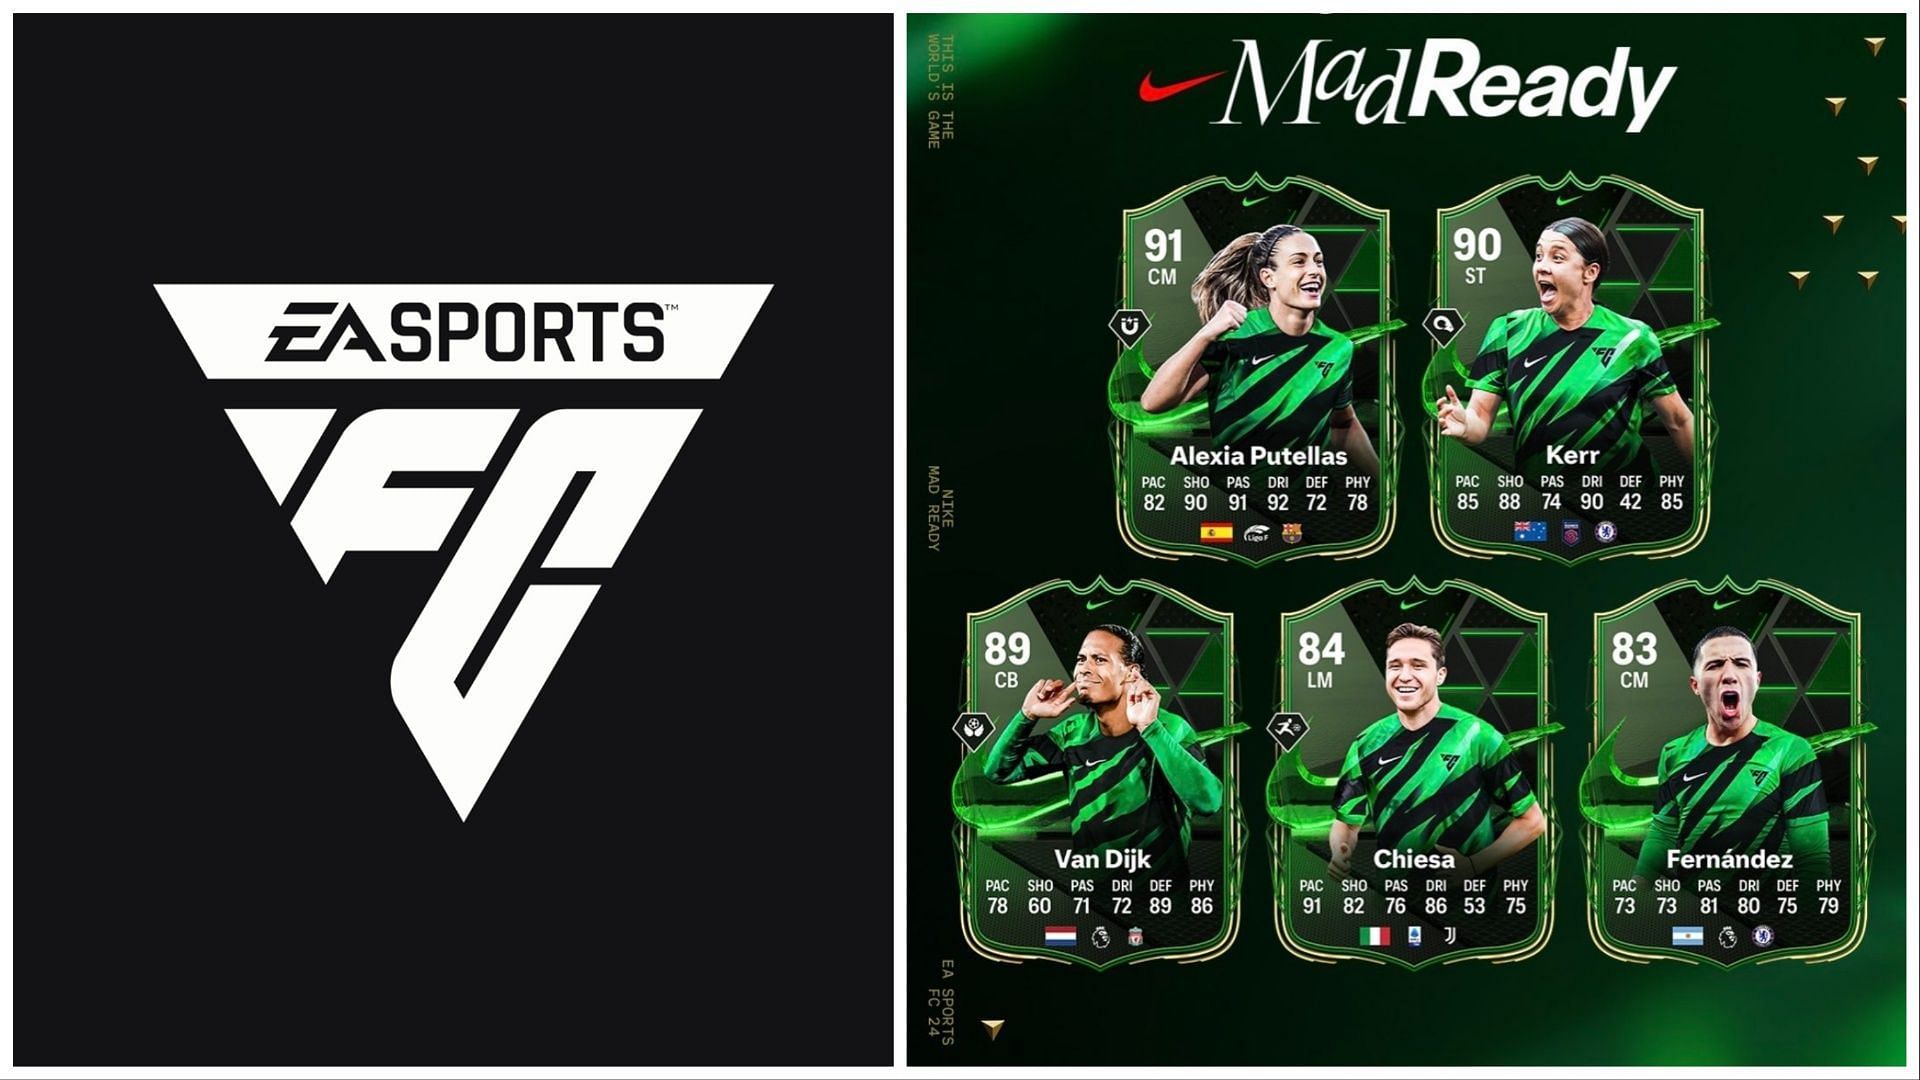 The Nike Mad Ready promo is now live (Images via EA Sports)